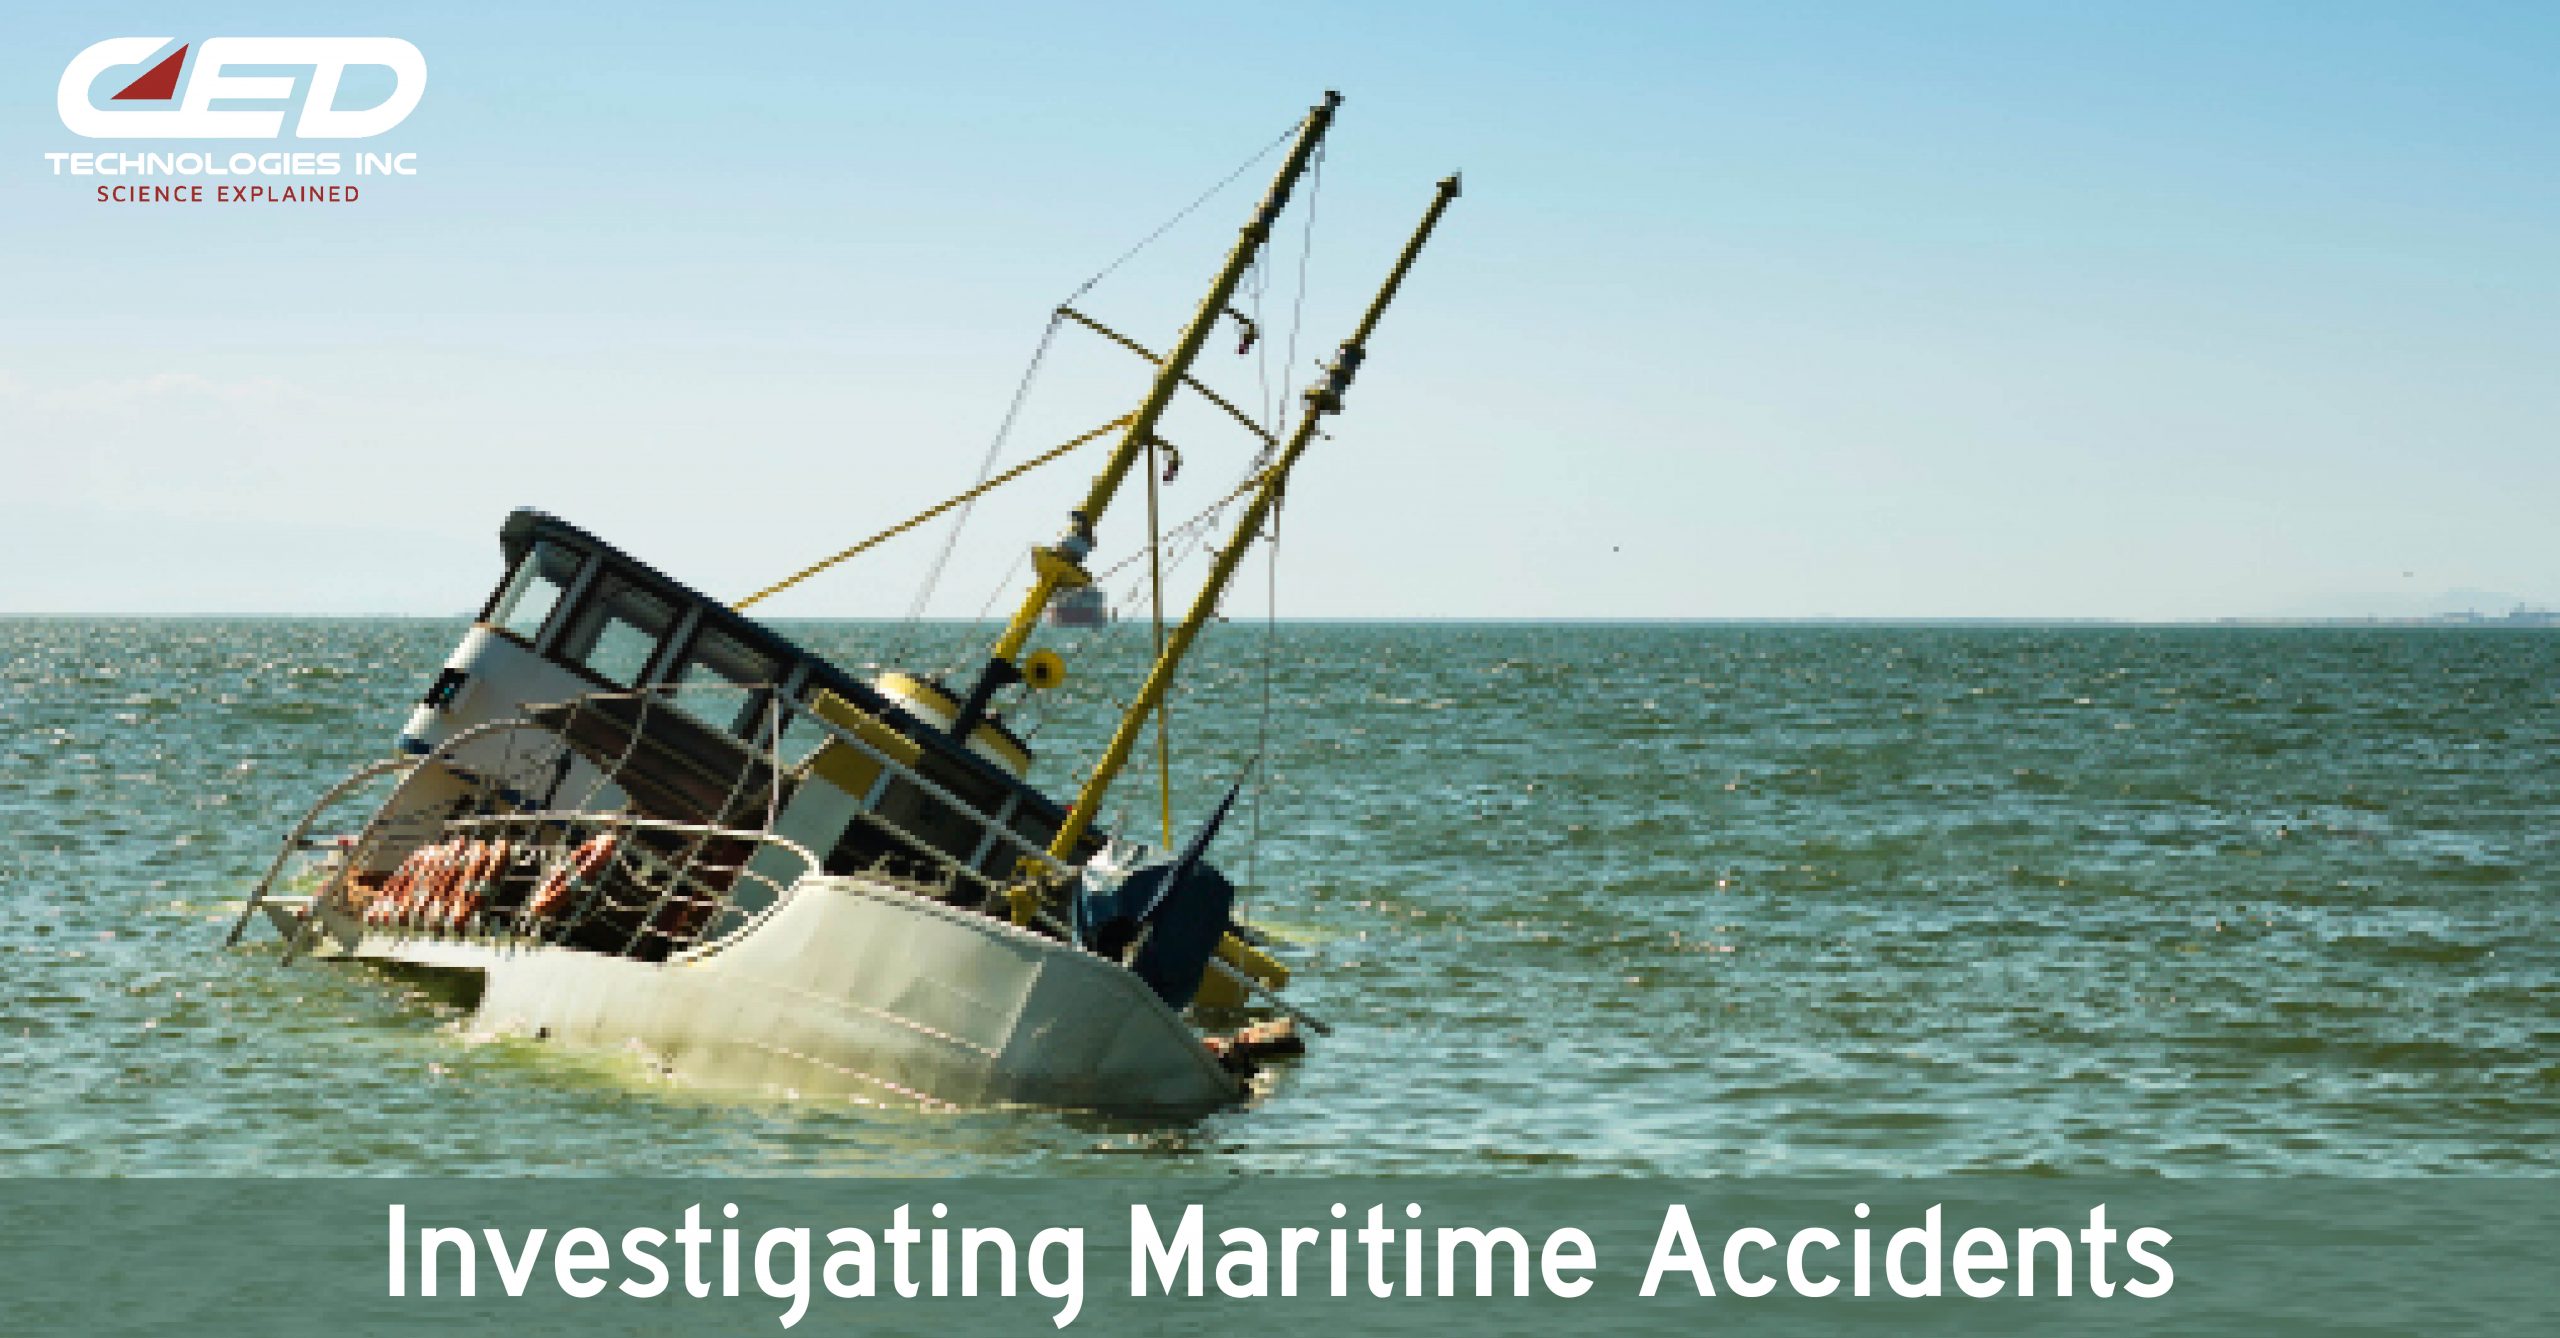 Maritime Accidents: Statistics and Safety